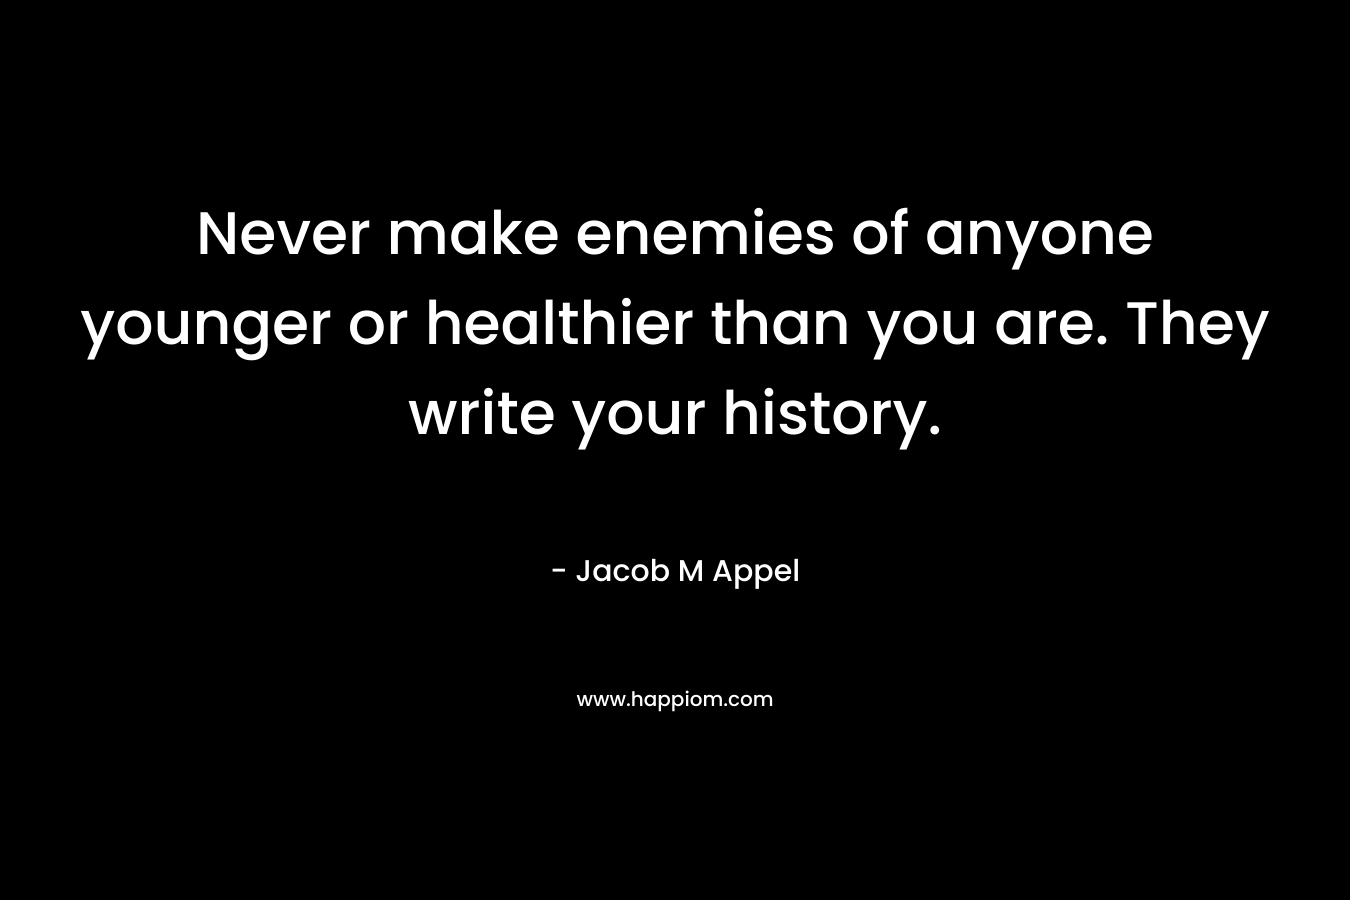 Never make enemies of anyone younger or healthier than you are. They write your history. – Jacob M Appel